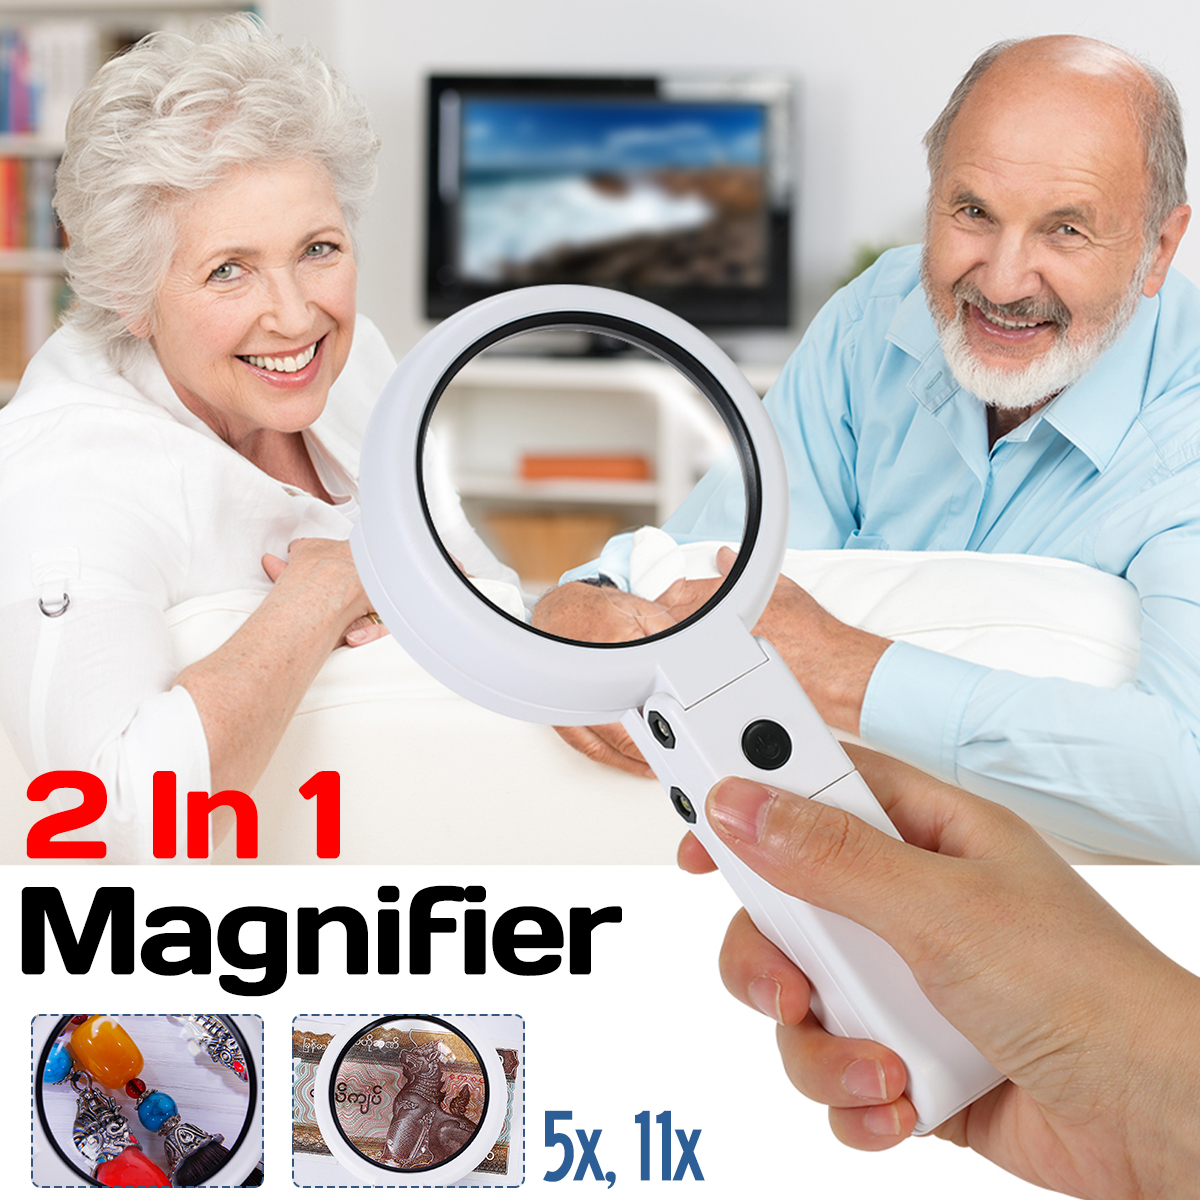 Handheld-Portable-Foldable-Lamp-Illuminated-Magnifier-5X-11X-Magnifying-Table-8-LED-Lights-Loupe-Mag-1472829-1